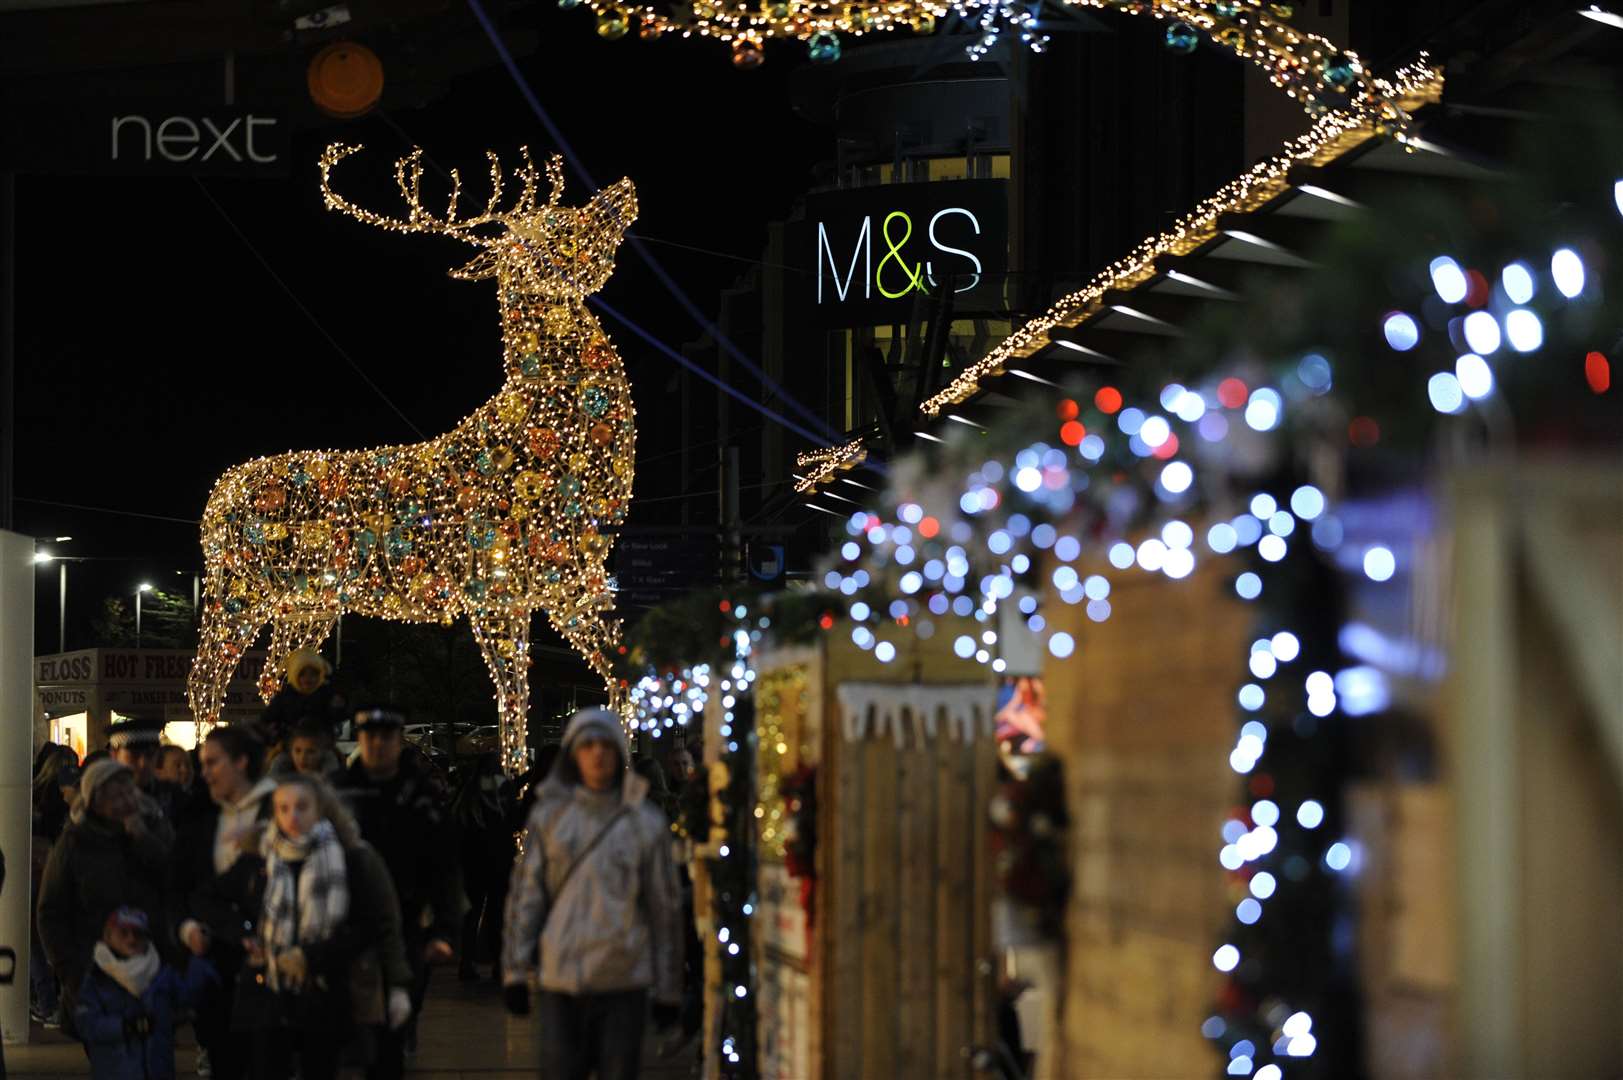 Westwood Cross has announced its Christmas opening hours. Picture: Tony Flashman